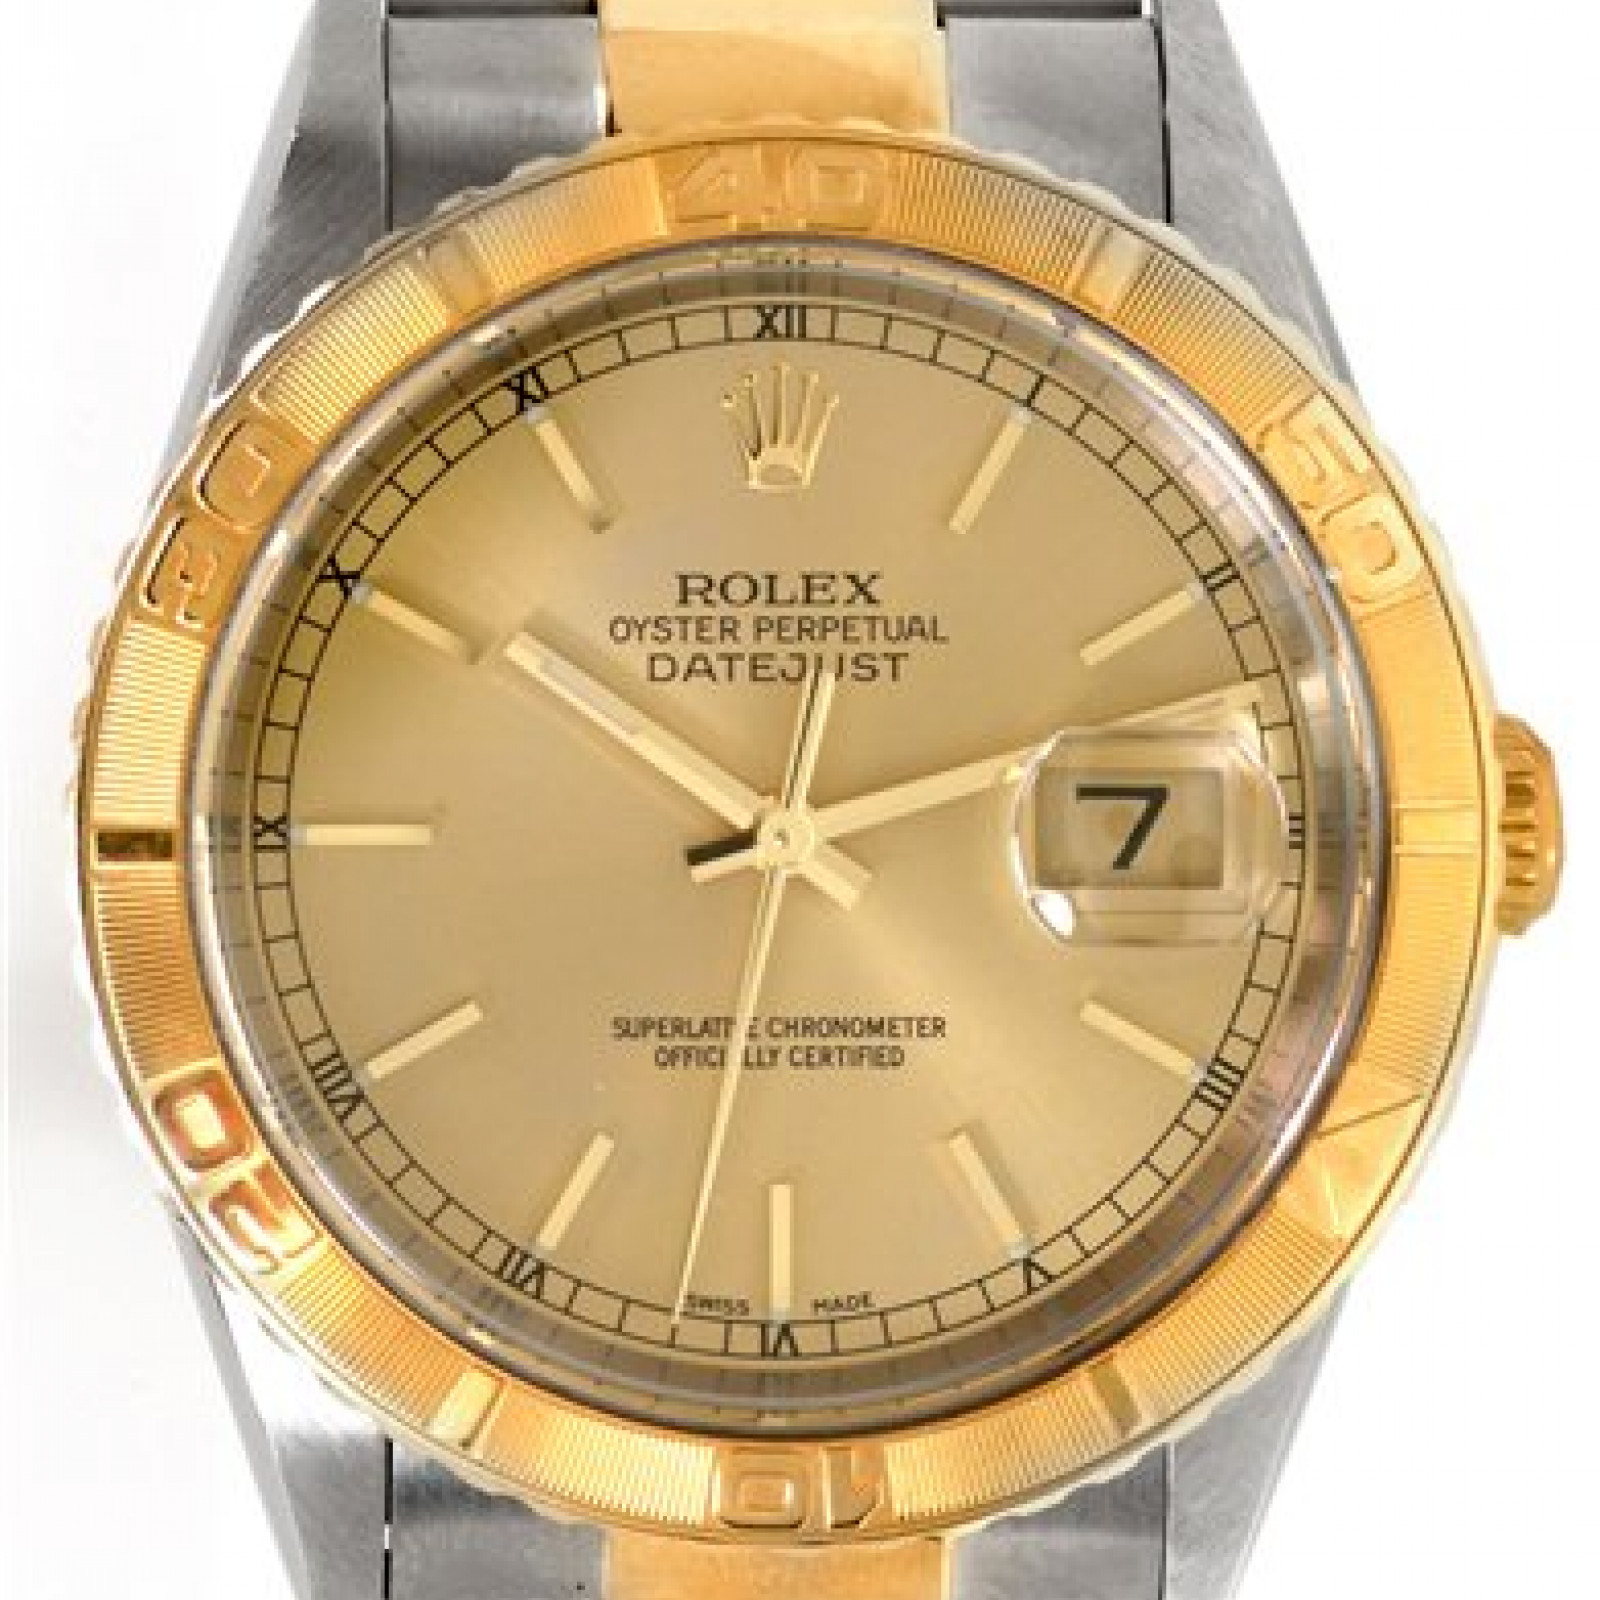 Rolex Turn-O-Graph Oyster Perpetual Datejust 16263